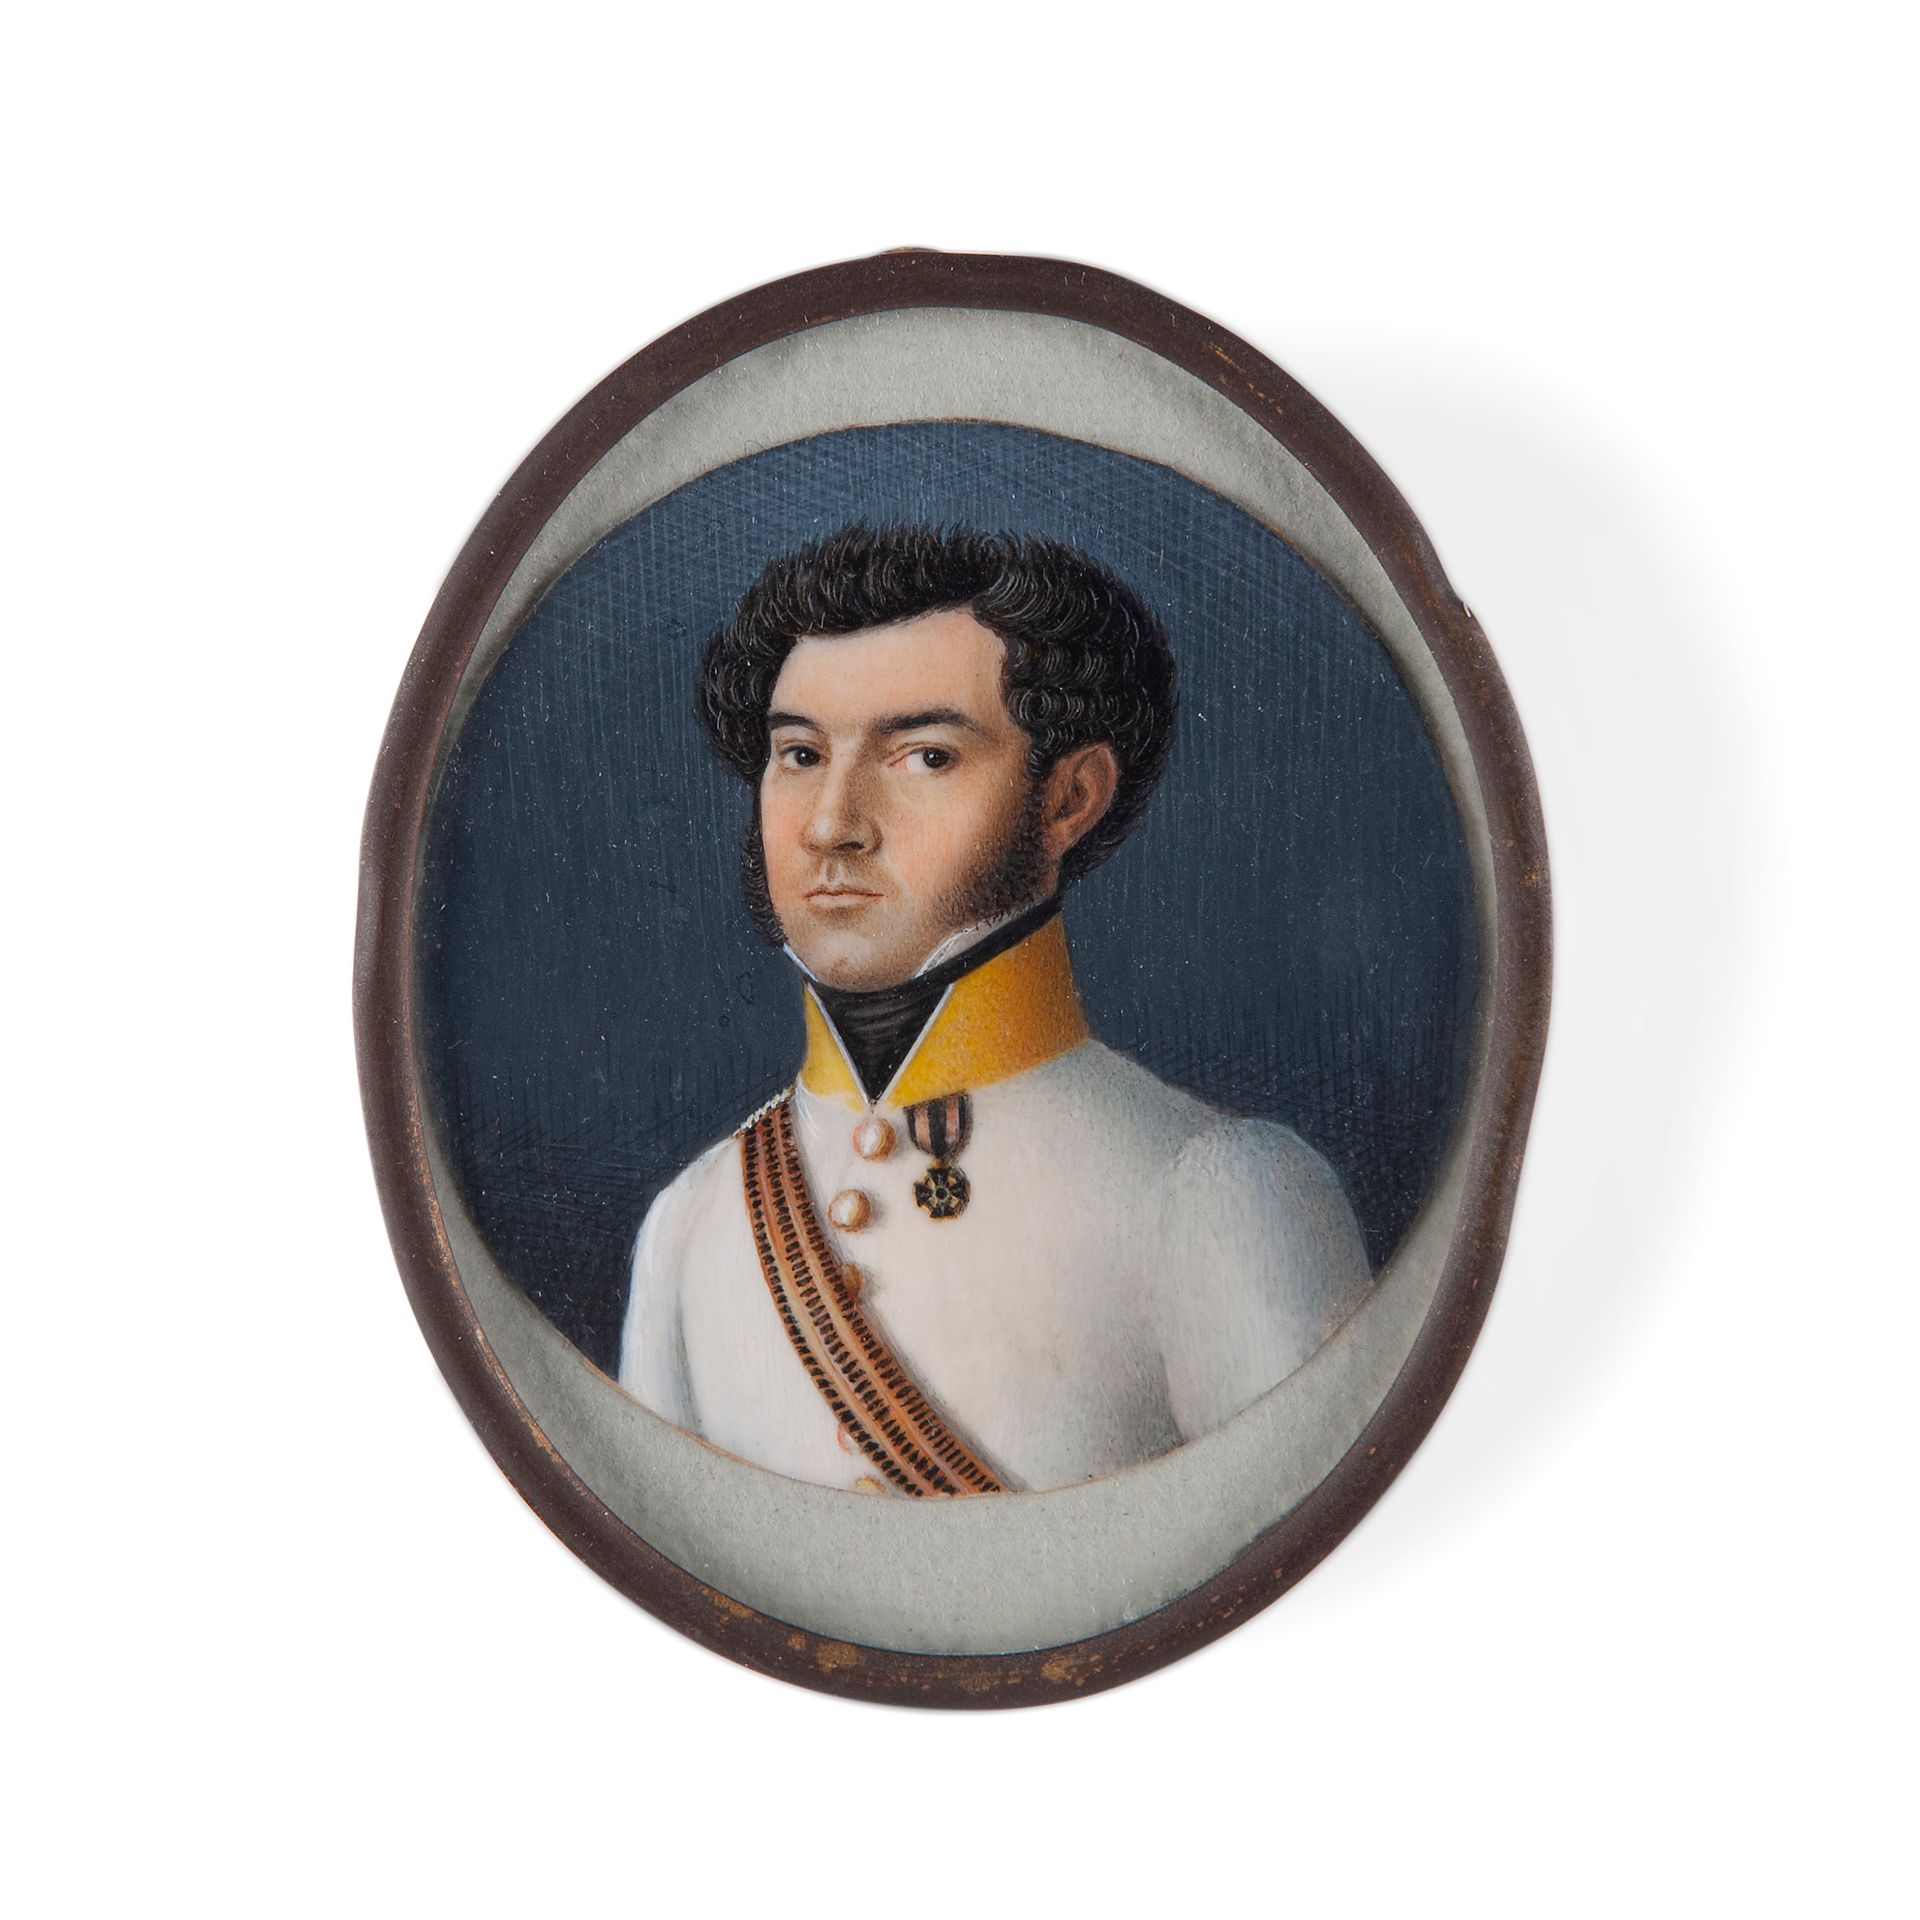 Portrait miniature of an official, late 18th - early 19th century 官方可能是圣弗拉基米尔勋章尺&hellip;